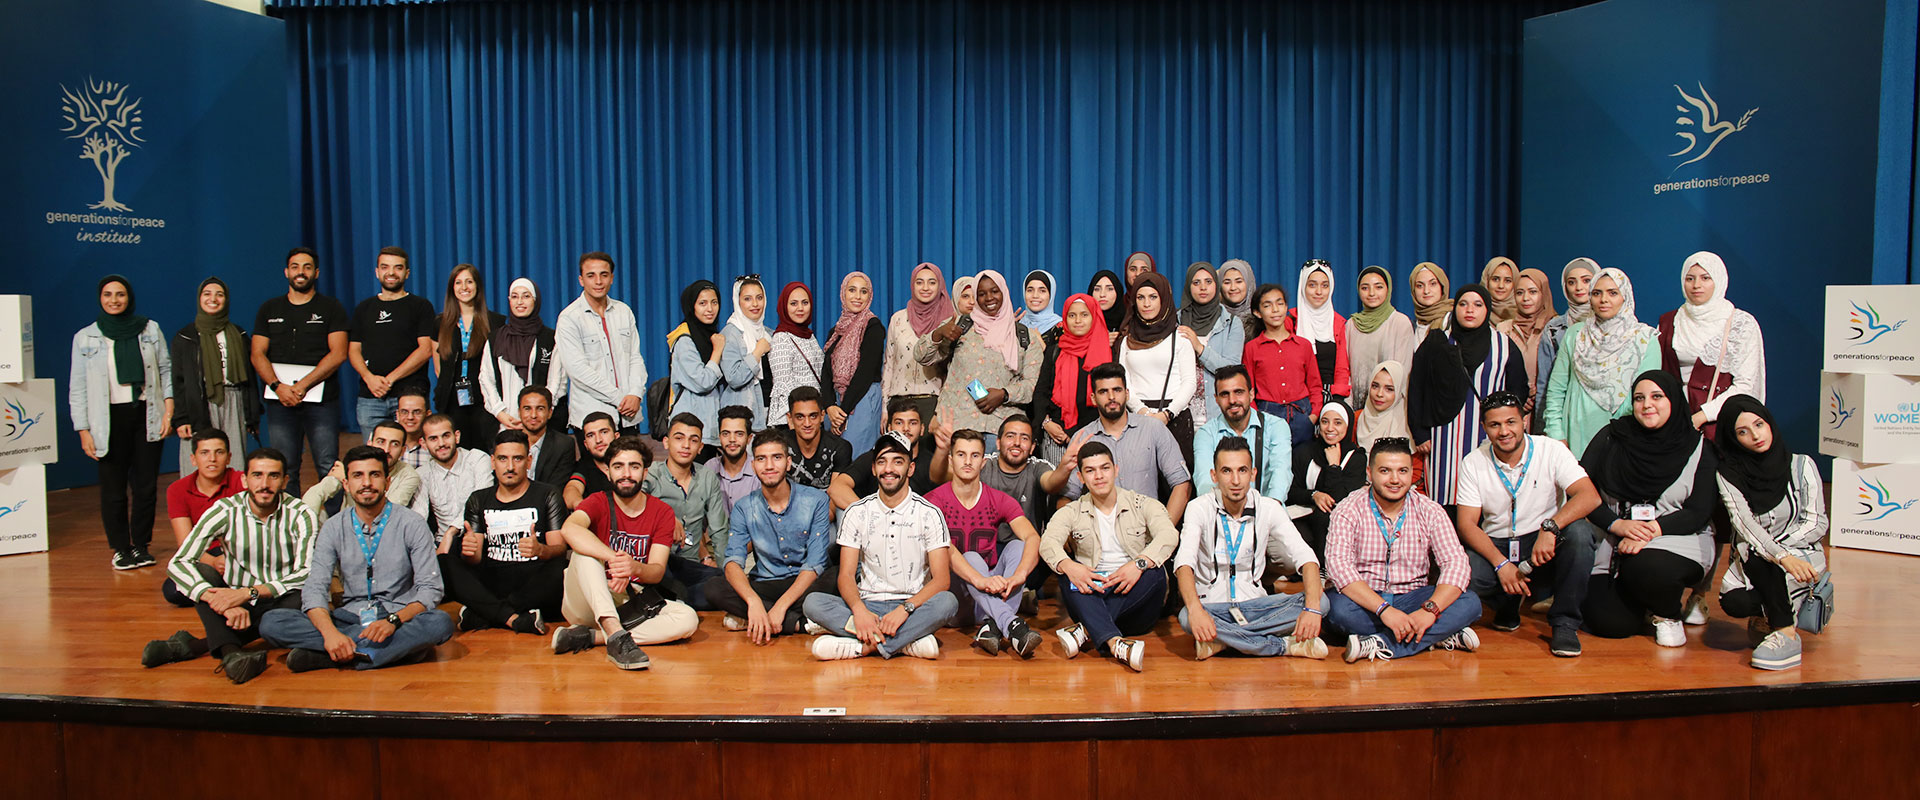 Youth from different cities in Jordan participate in an advocacy campaign on gender and gender roles hosted by Generations For Peace in partnership with UN Women Jordan in September 2019. Photo: Generations for Peace/Ahmad Albakri